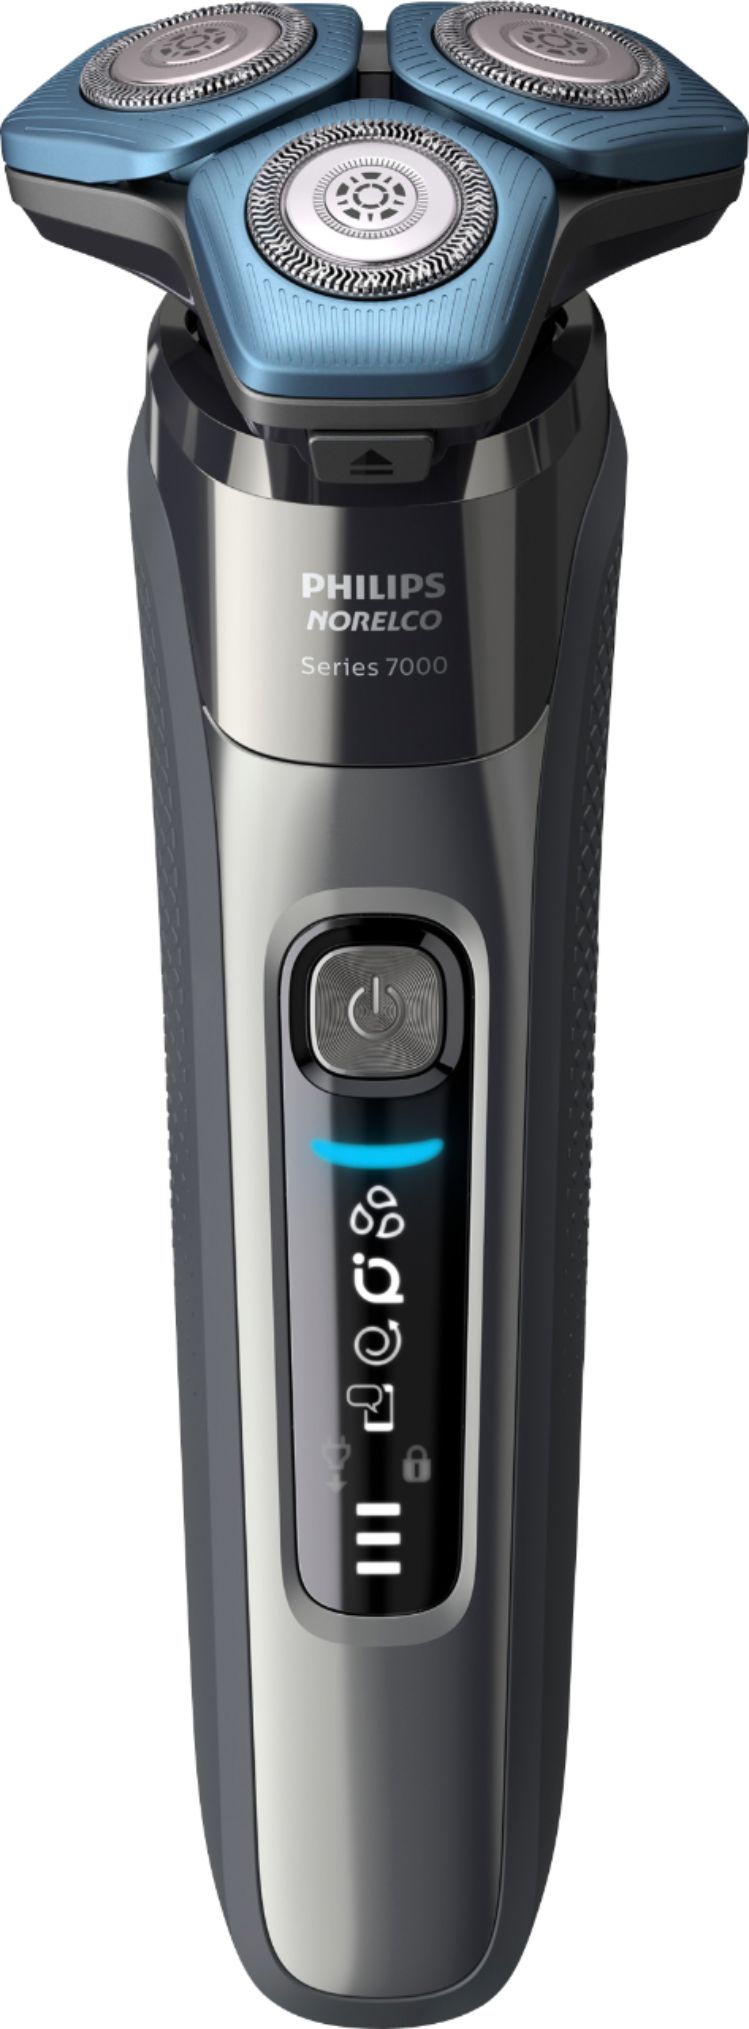 Angle View: Philips Norelco Shaver 7100, Rechargeable Wet & Dry Electric Shaver with SenseIQ Technology and Pop-up Trimmer S7788/82 - Dark Chrome